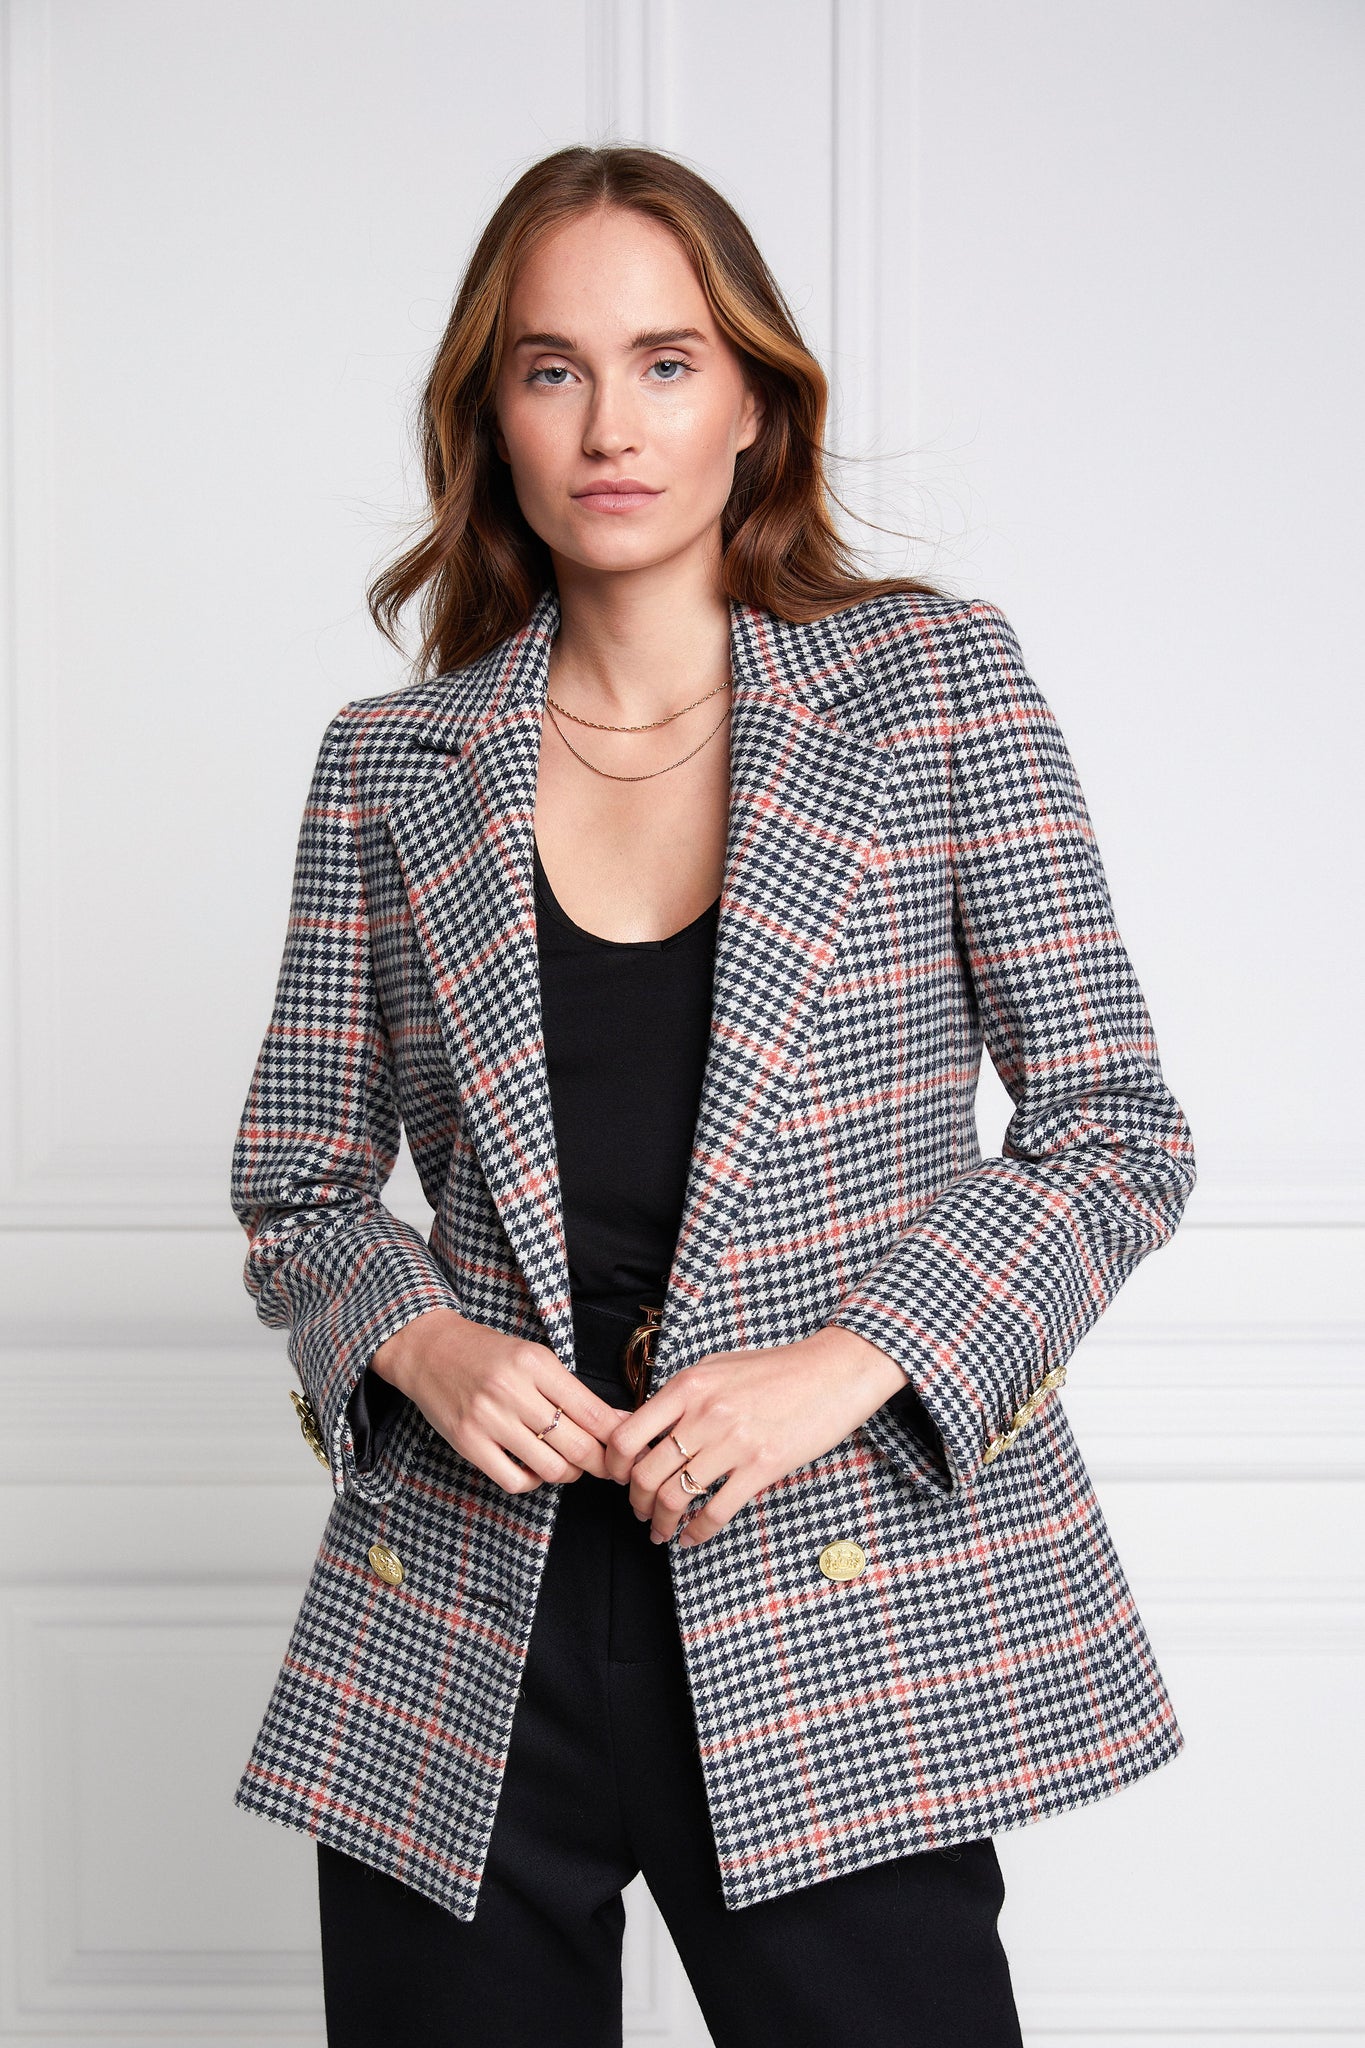 double breasted wool blazer in black white and pink check with two hip pockets and gold button details down front and on cuffs and handmade in the uk